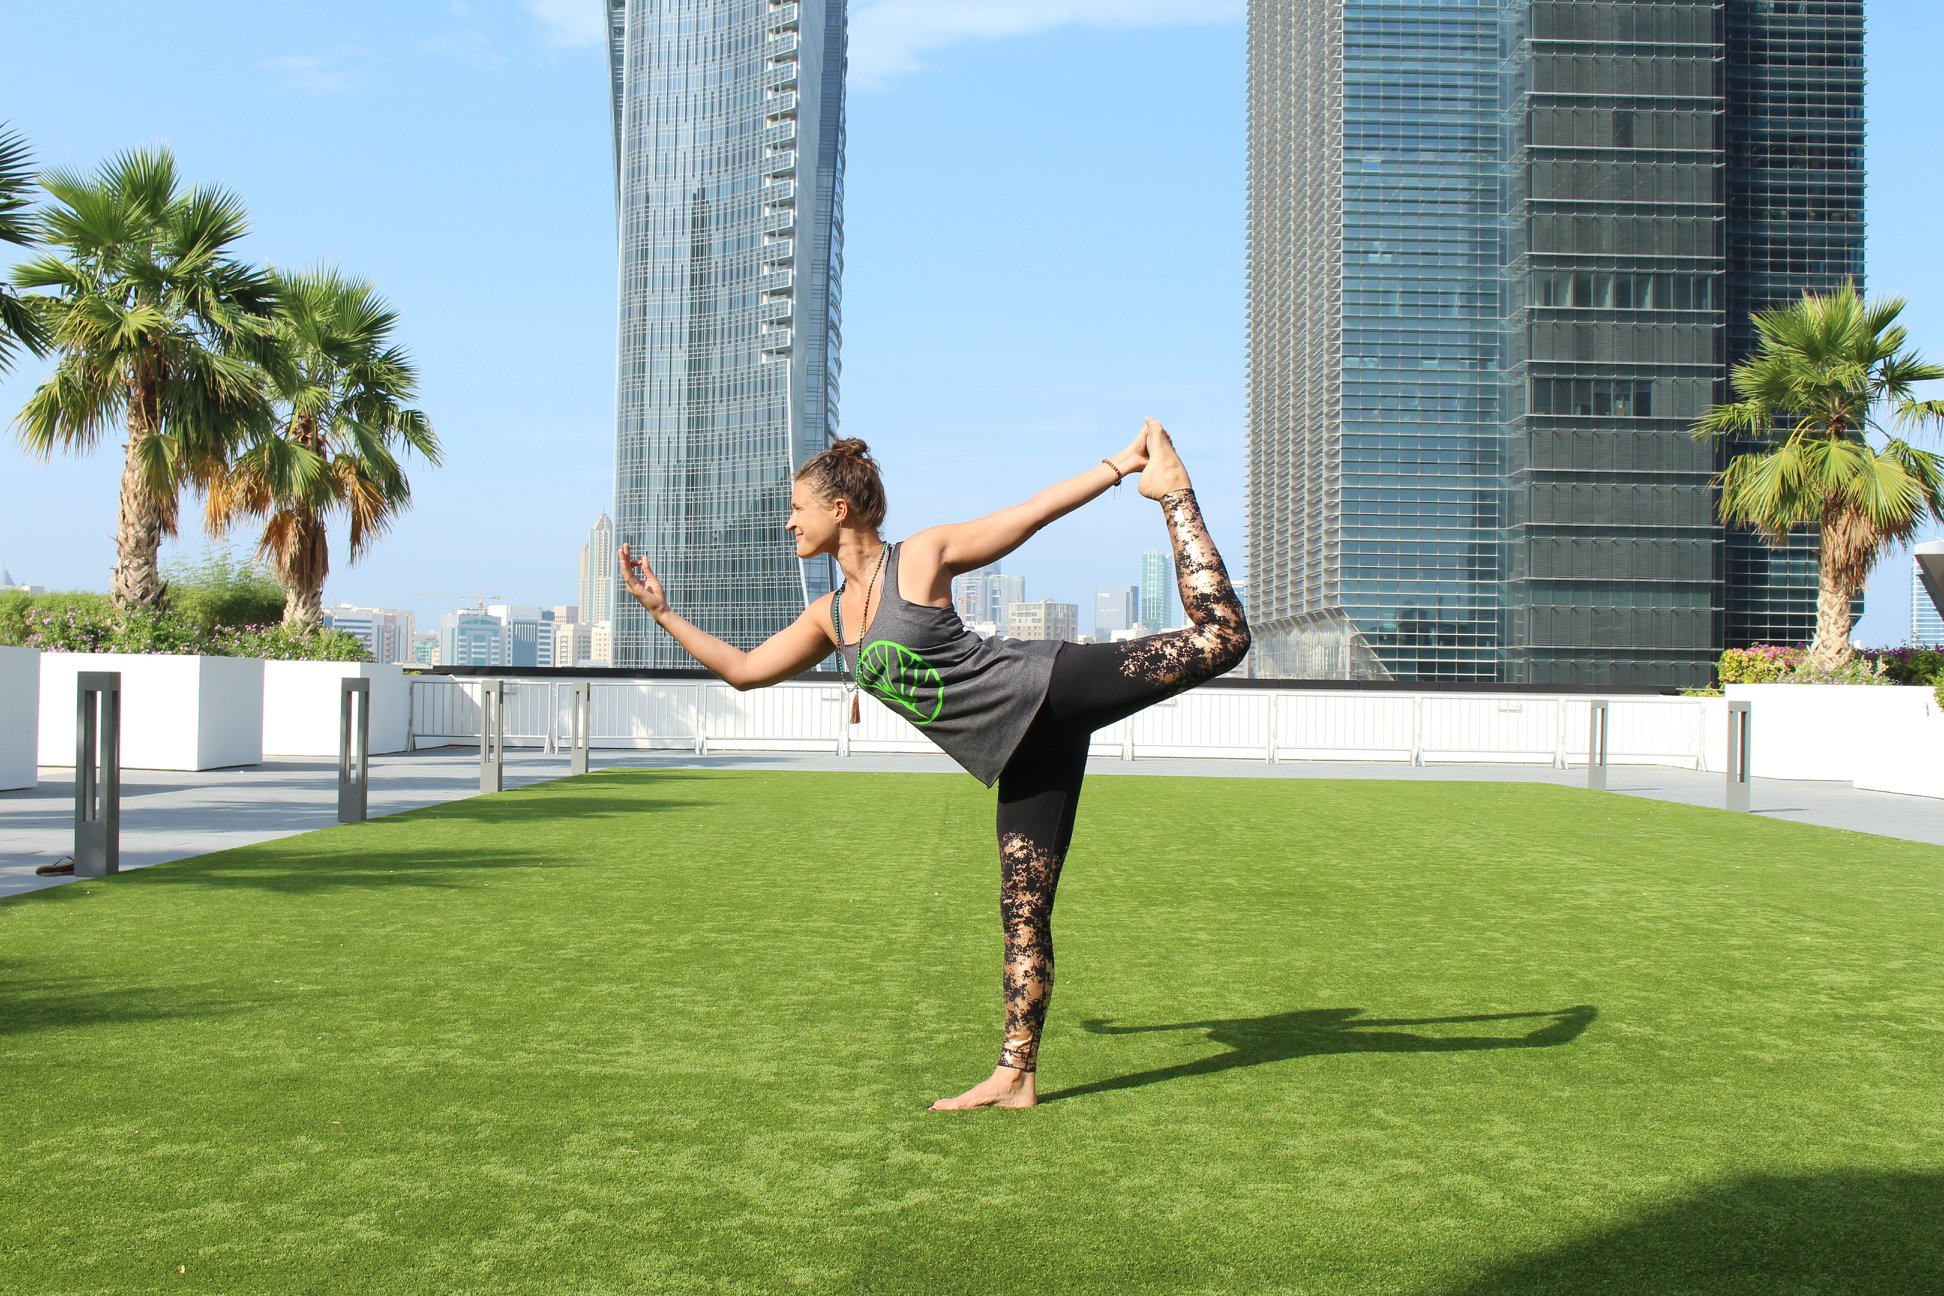 Keep Fit With Complimentary Fitness Activities At The Galleria Al Maryah Island